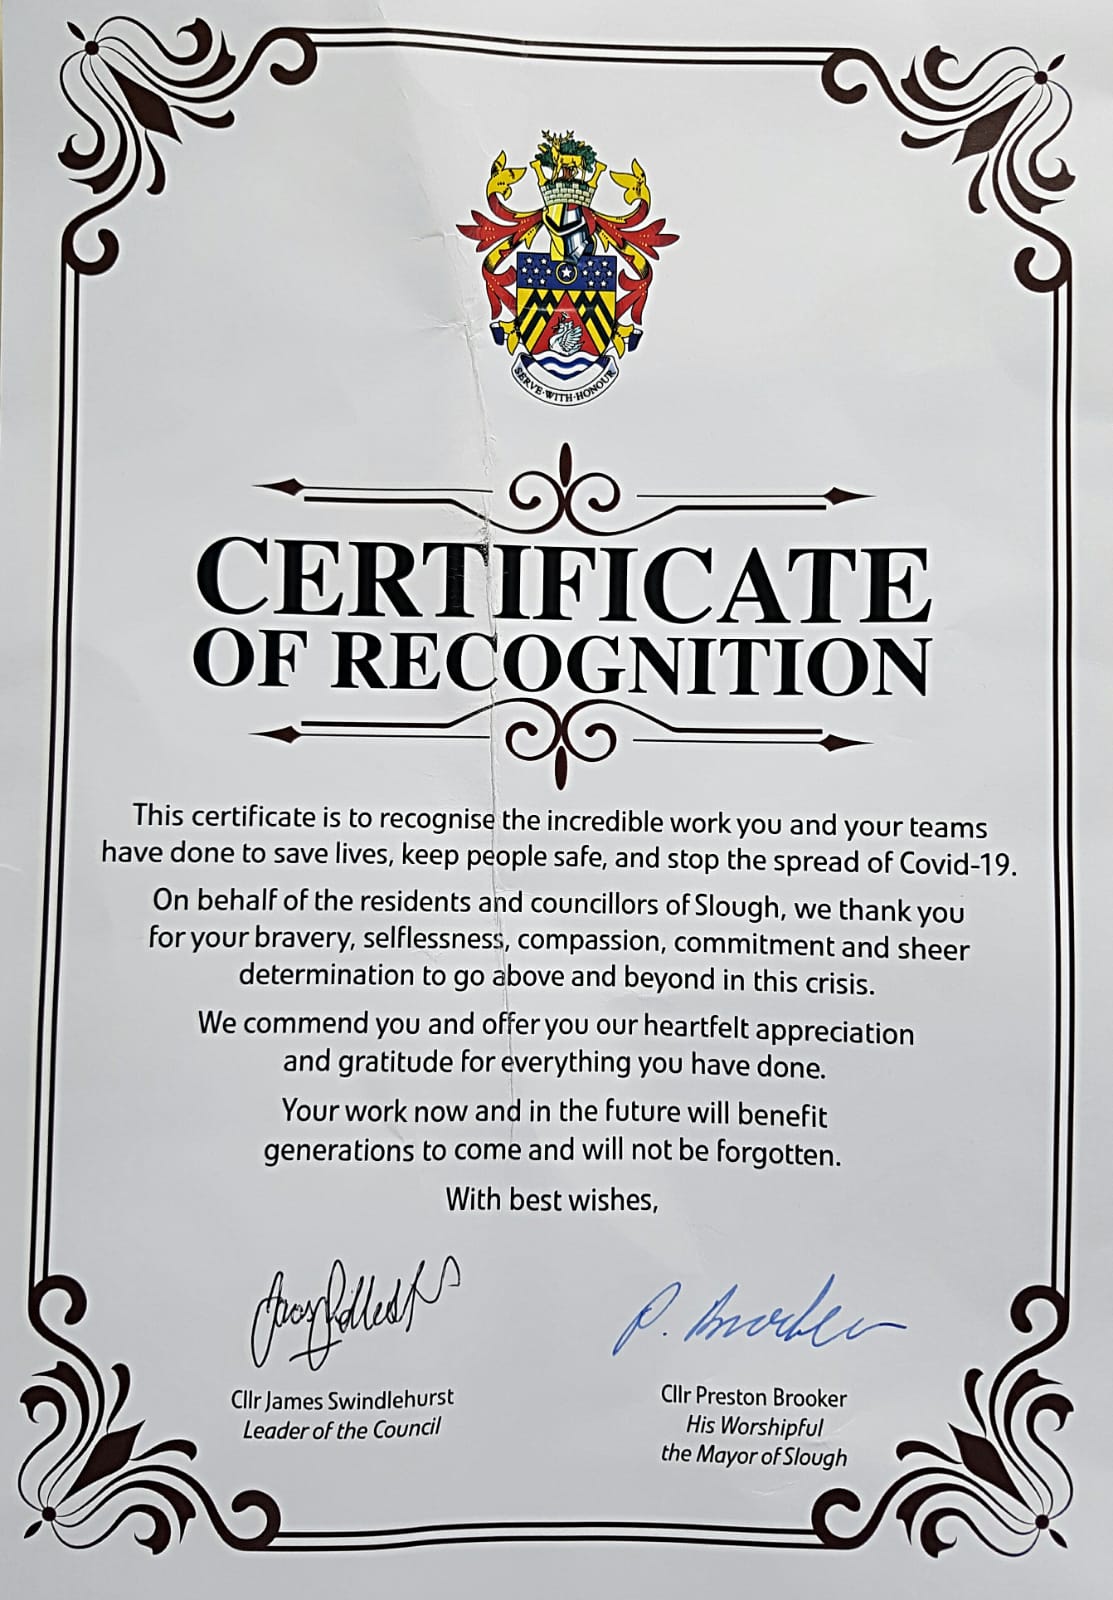 Certificate of Recognition for Ujala's support of the Slough Community